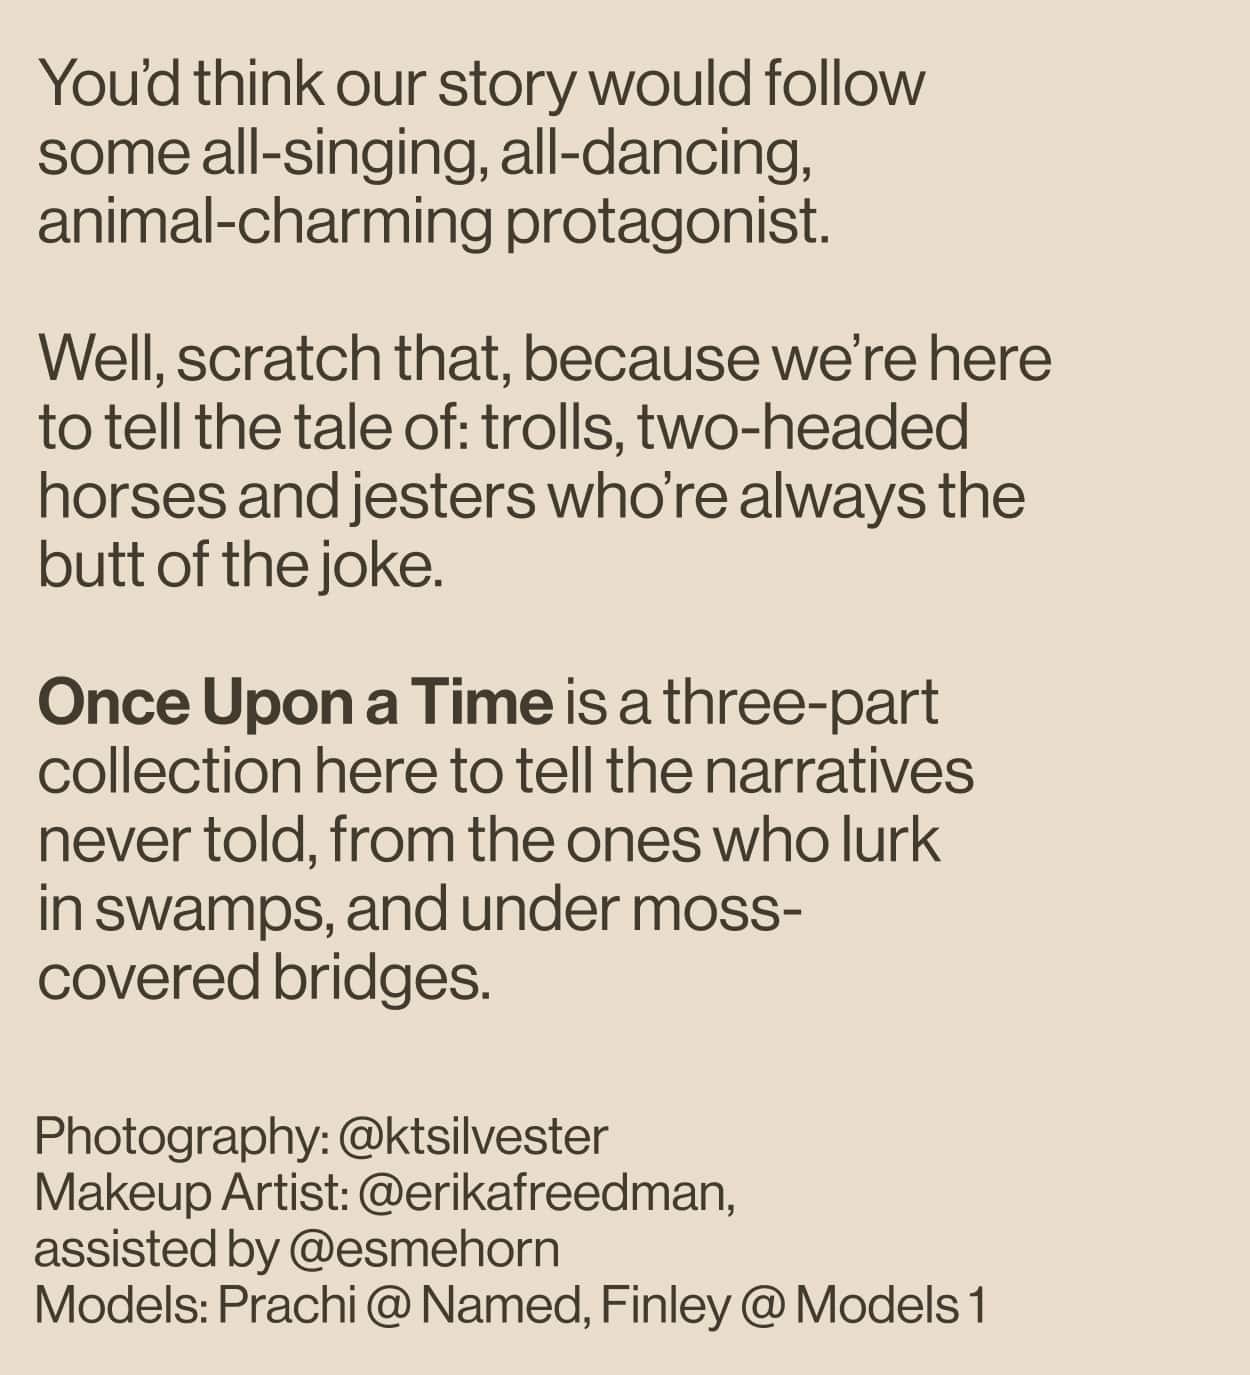 Once Upon a Time Editorial, All Chapters